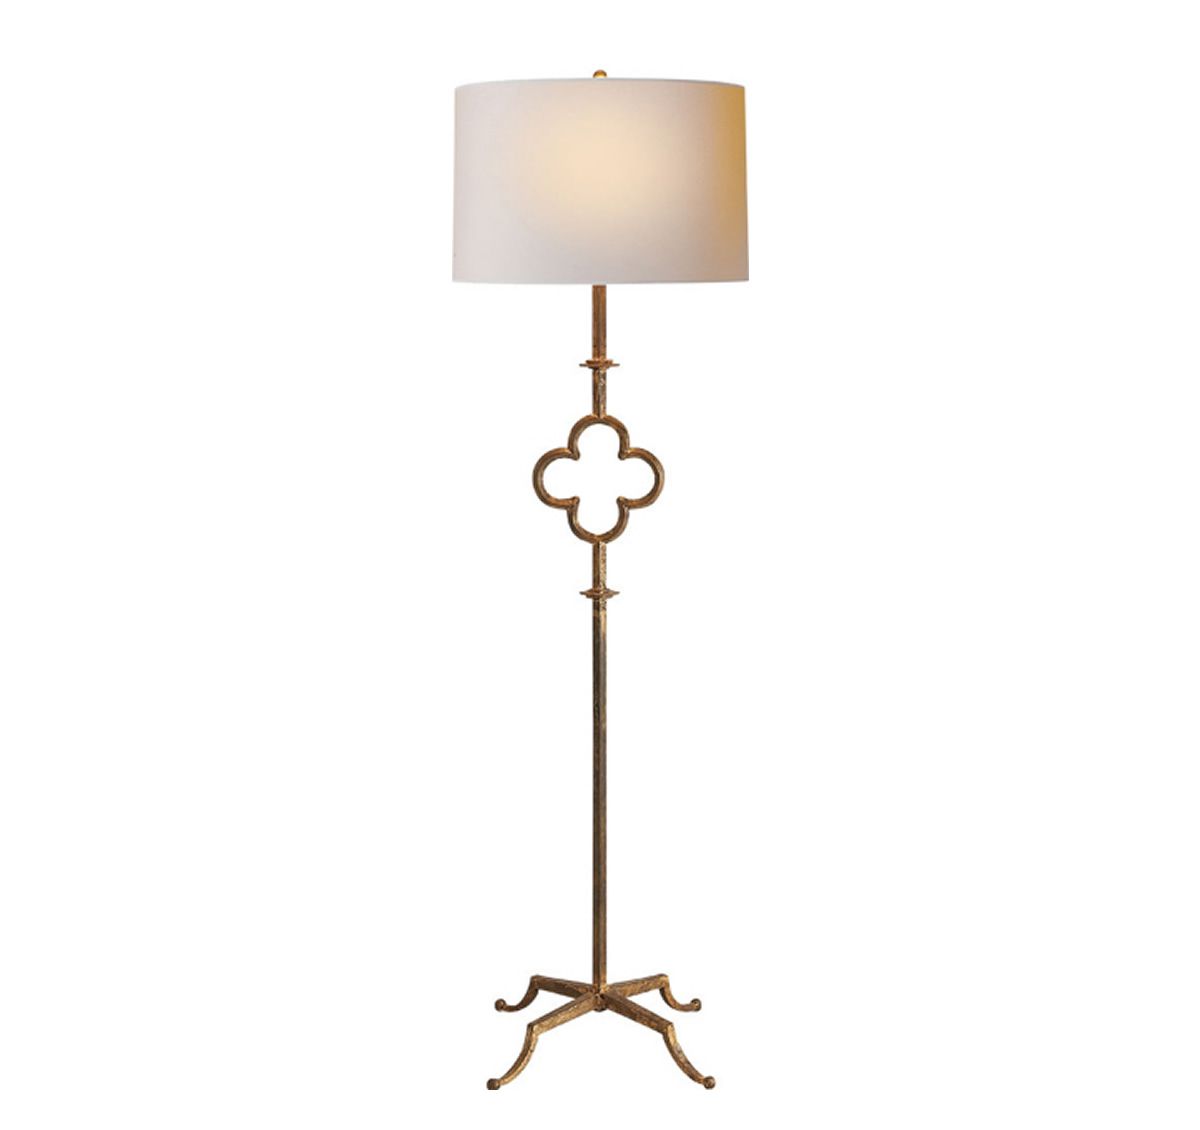 Quatrefoil Floor Lamp | The Kellogg Collection For 75 Inch Floor Lamps (View 14 of 15)